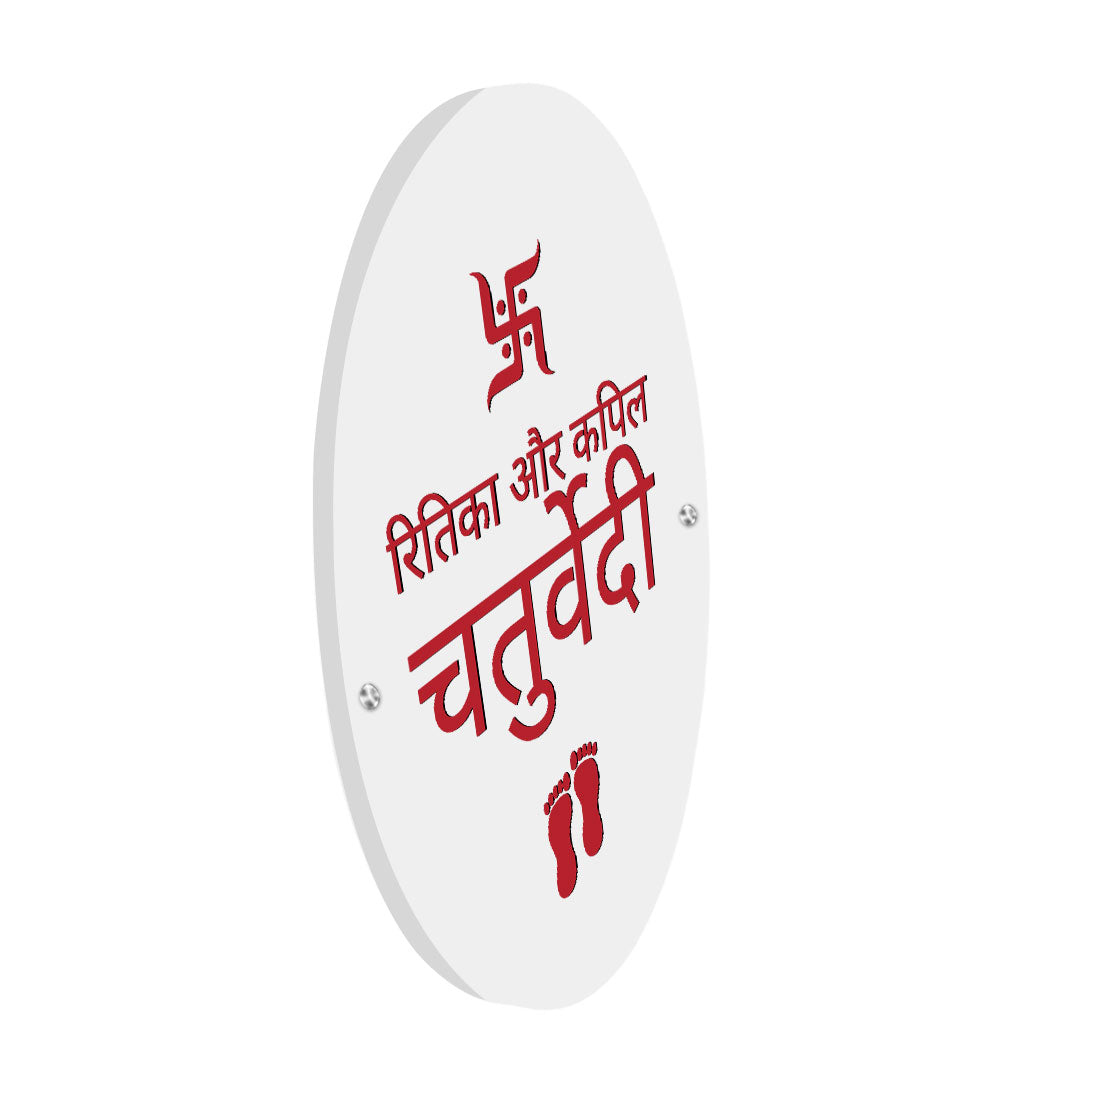 Hindi Name Plate for Home Round Nameplate with Swastik Design